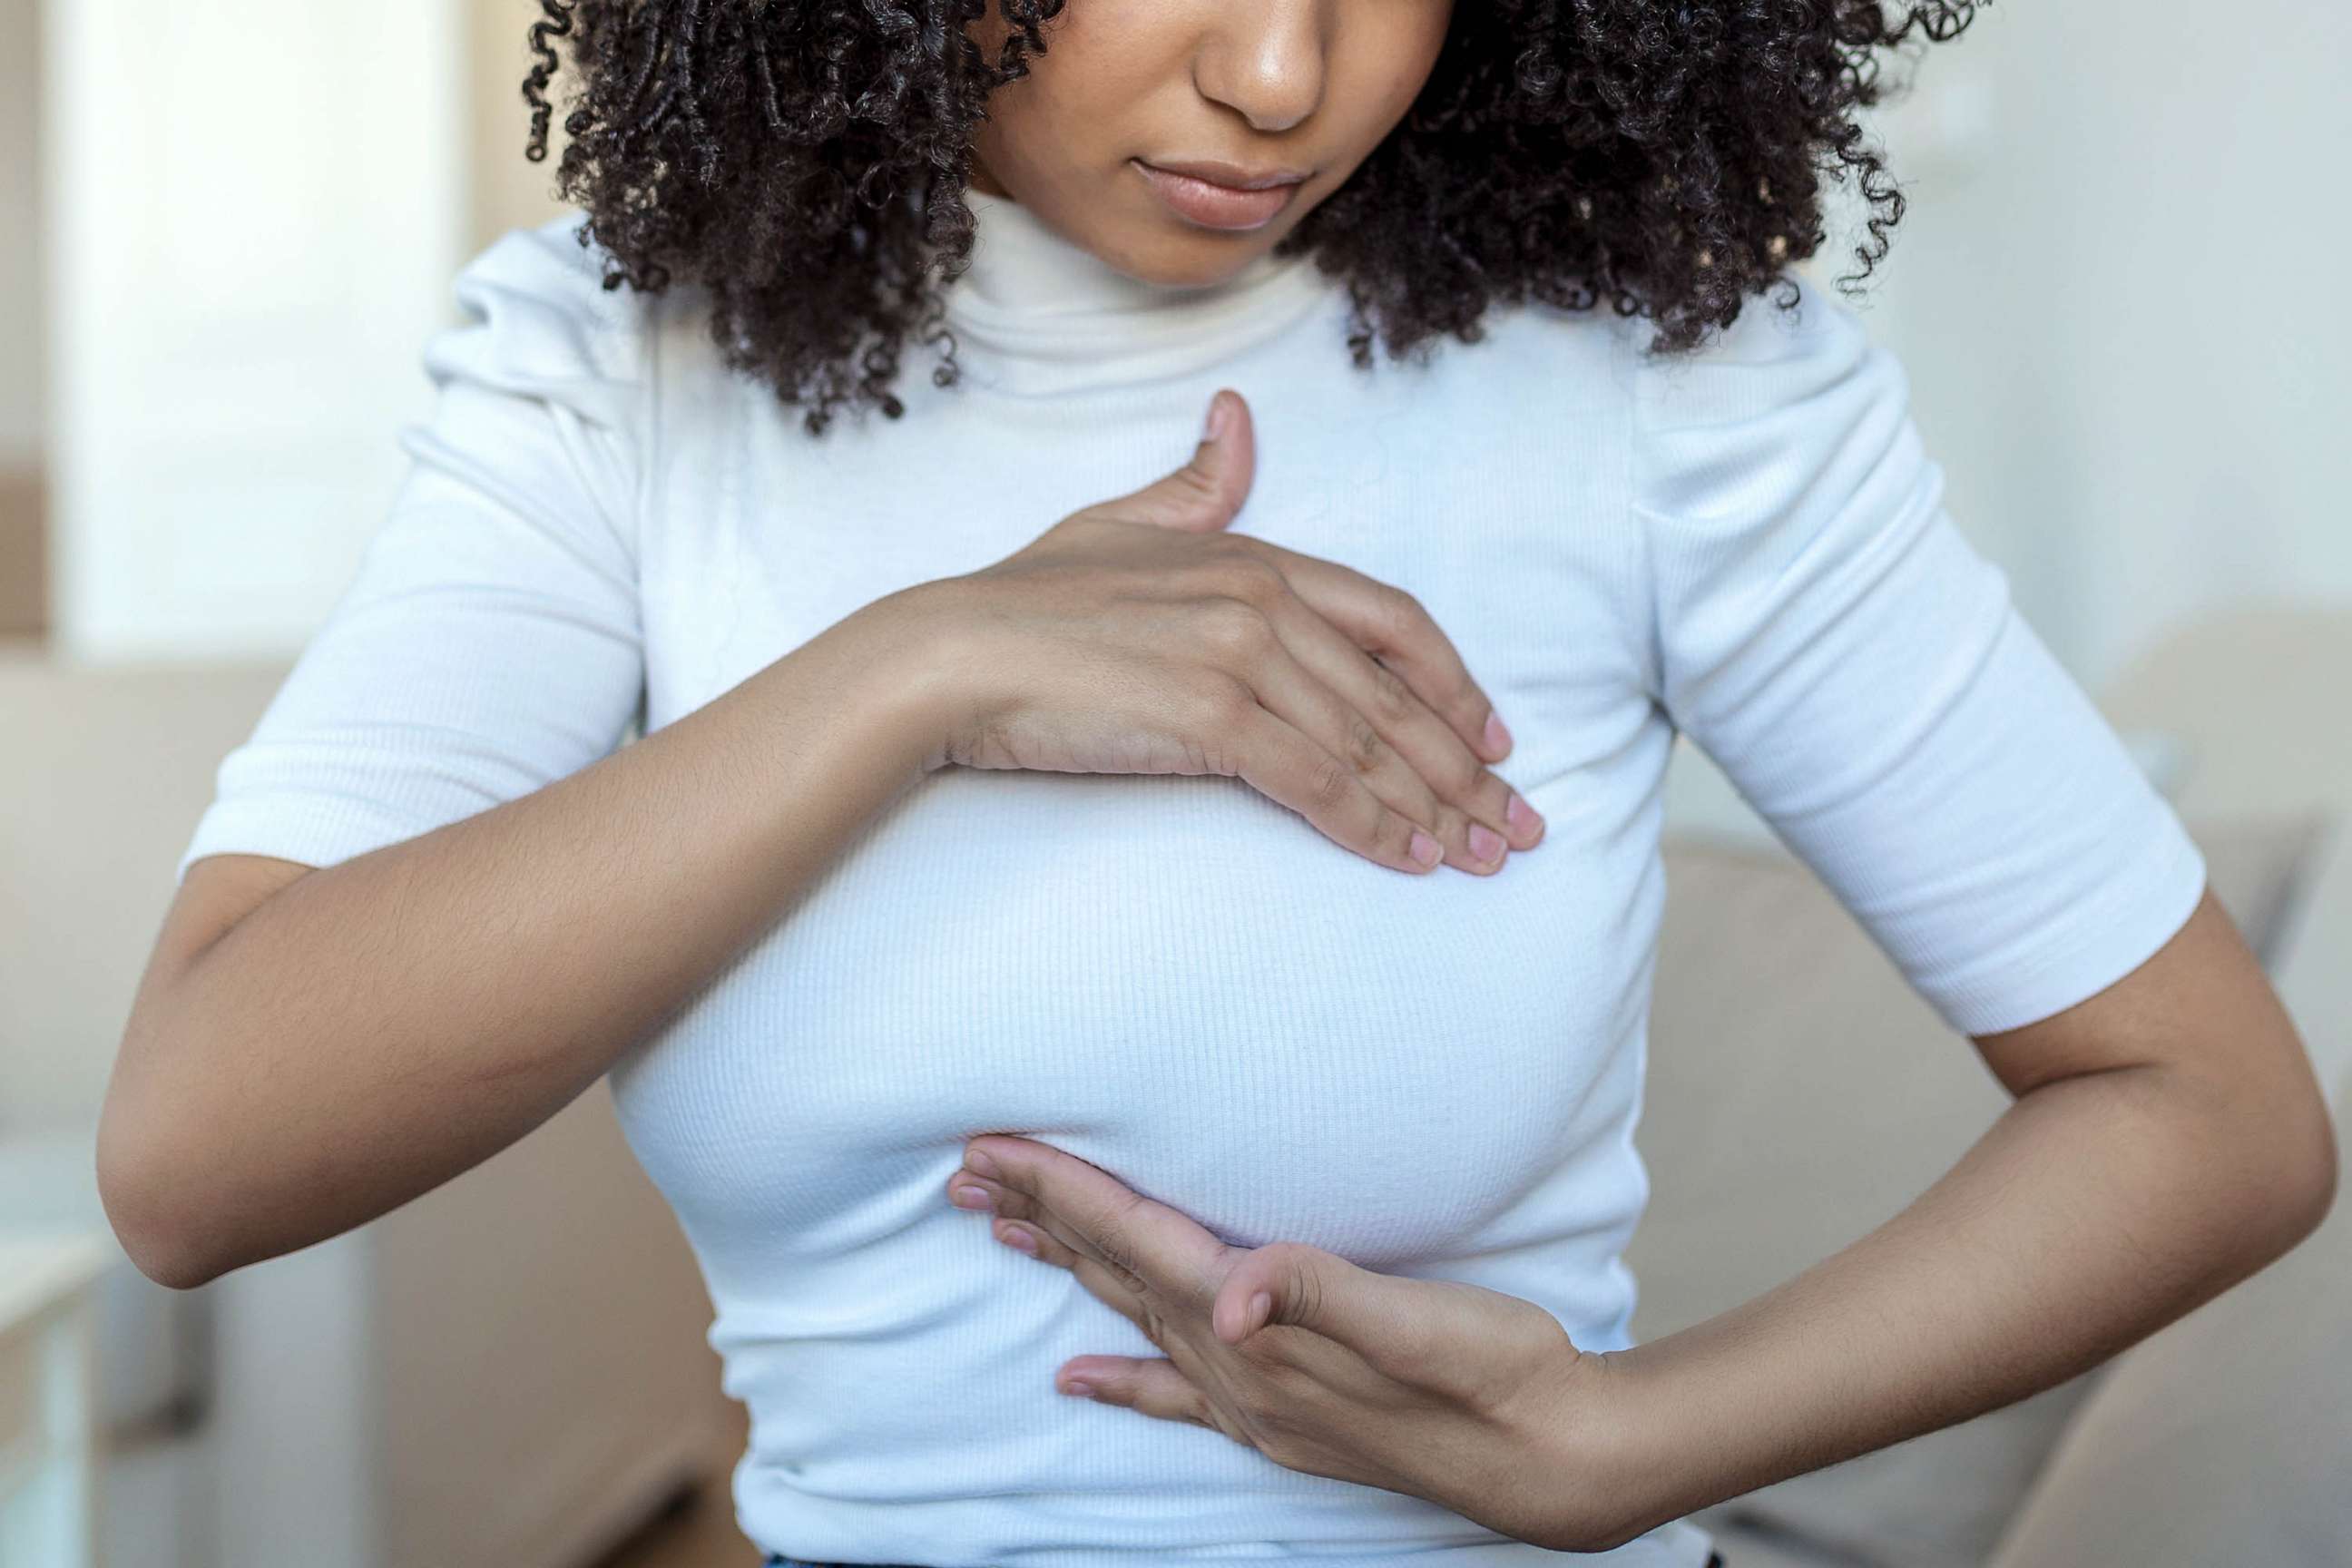 STOCK PHOTO: A woman palpats her breast